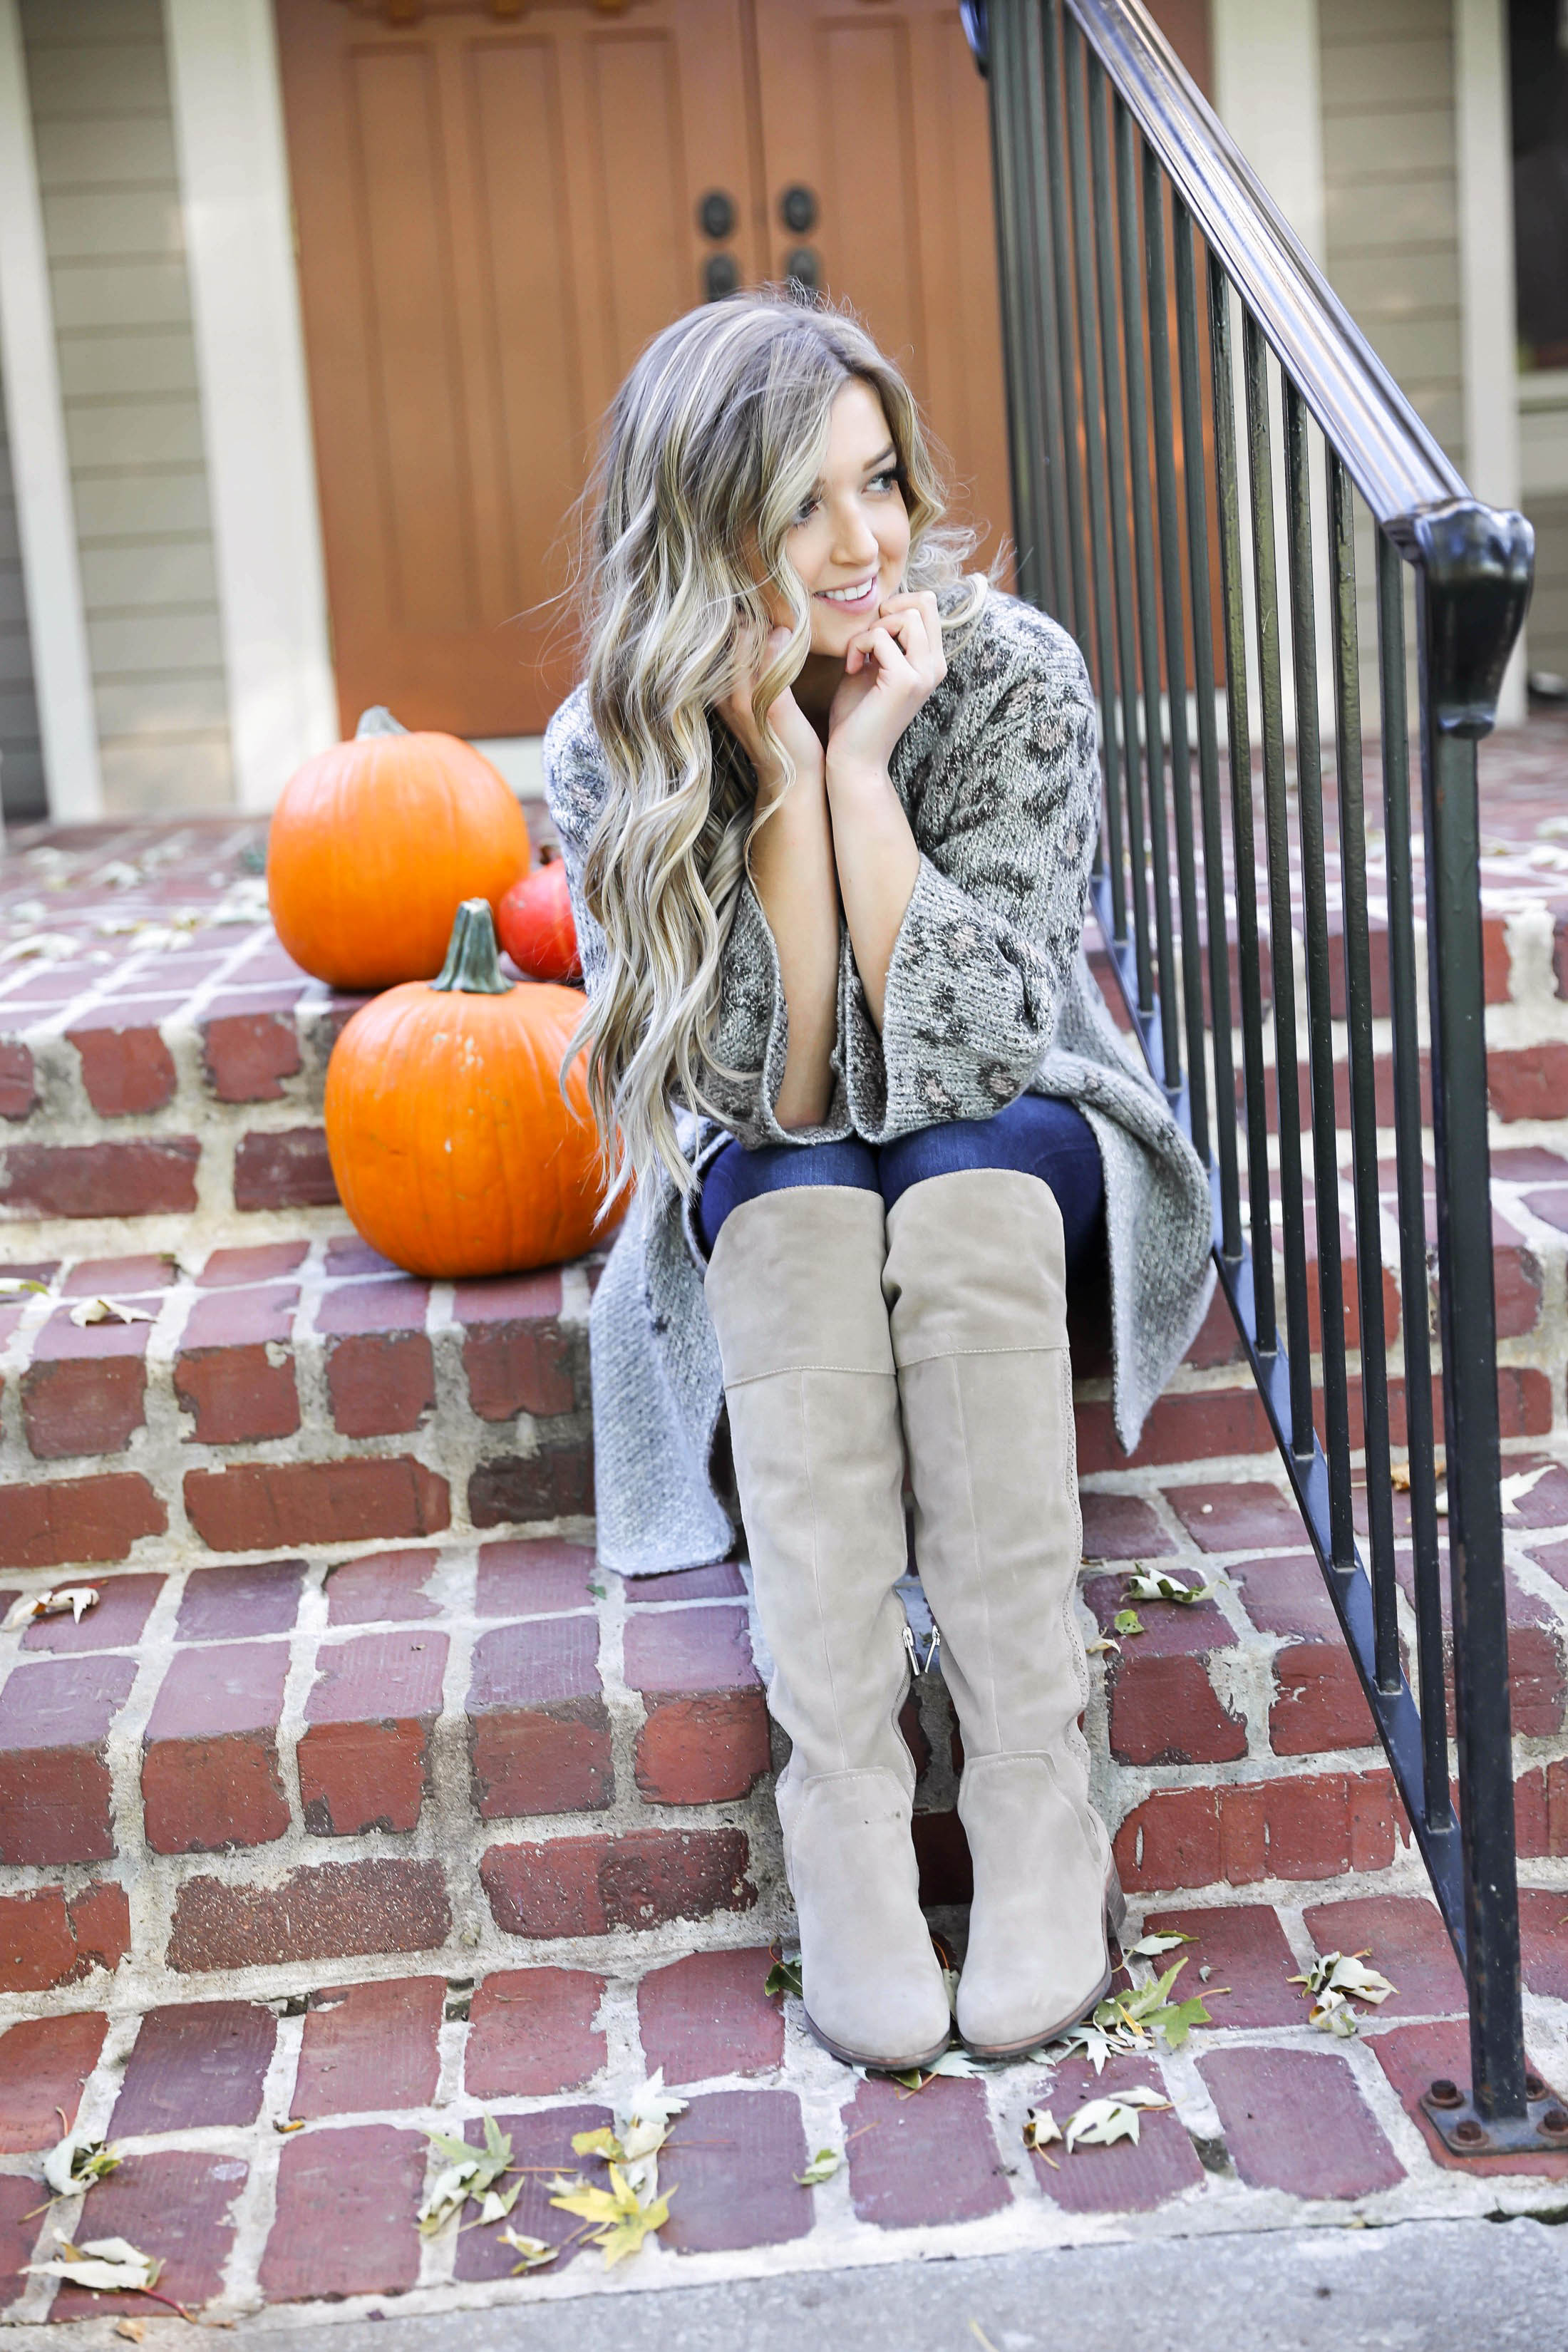 Natural beaded row extensions! The best stylist for NBR extensions in Kansas City is Traci Morby! Fall outfit idea! Sitting on a porch of pumpkins wearing my favorite leopard cardigan! Details on fashion blog daily dose of charm by lauren lindmark